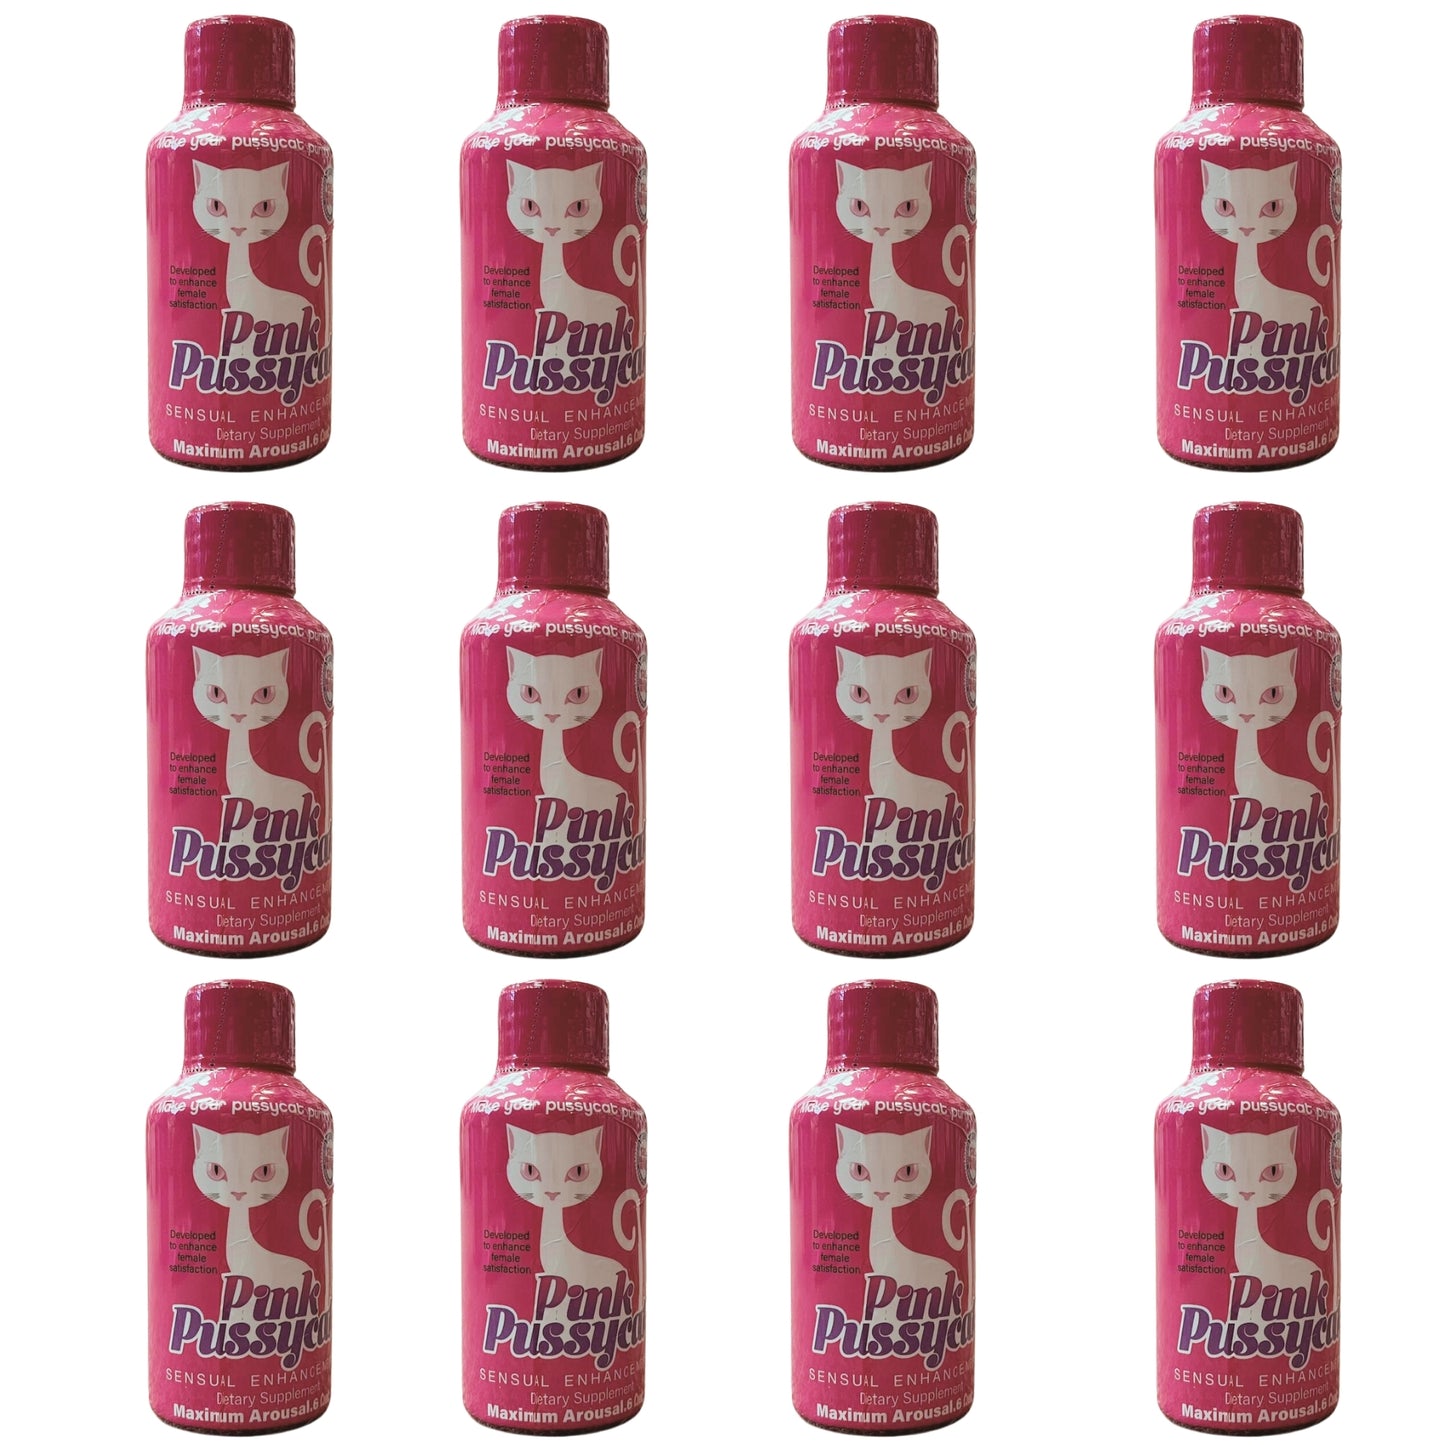 Pink PussyCat Honey Shots For Her